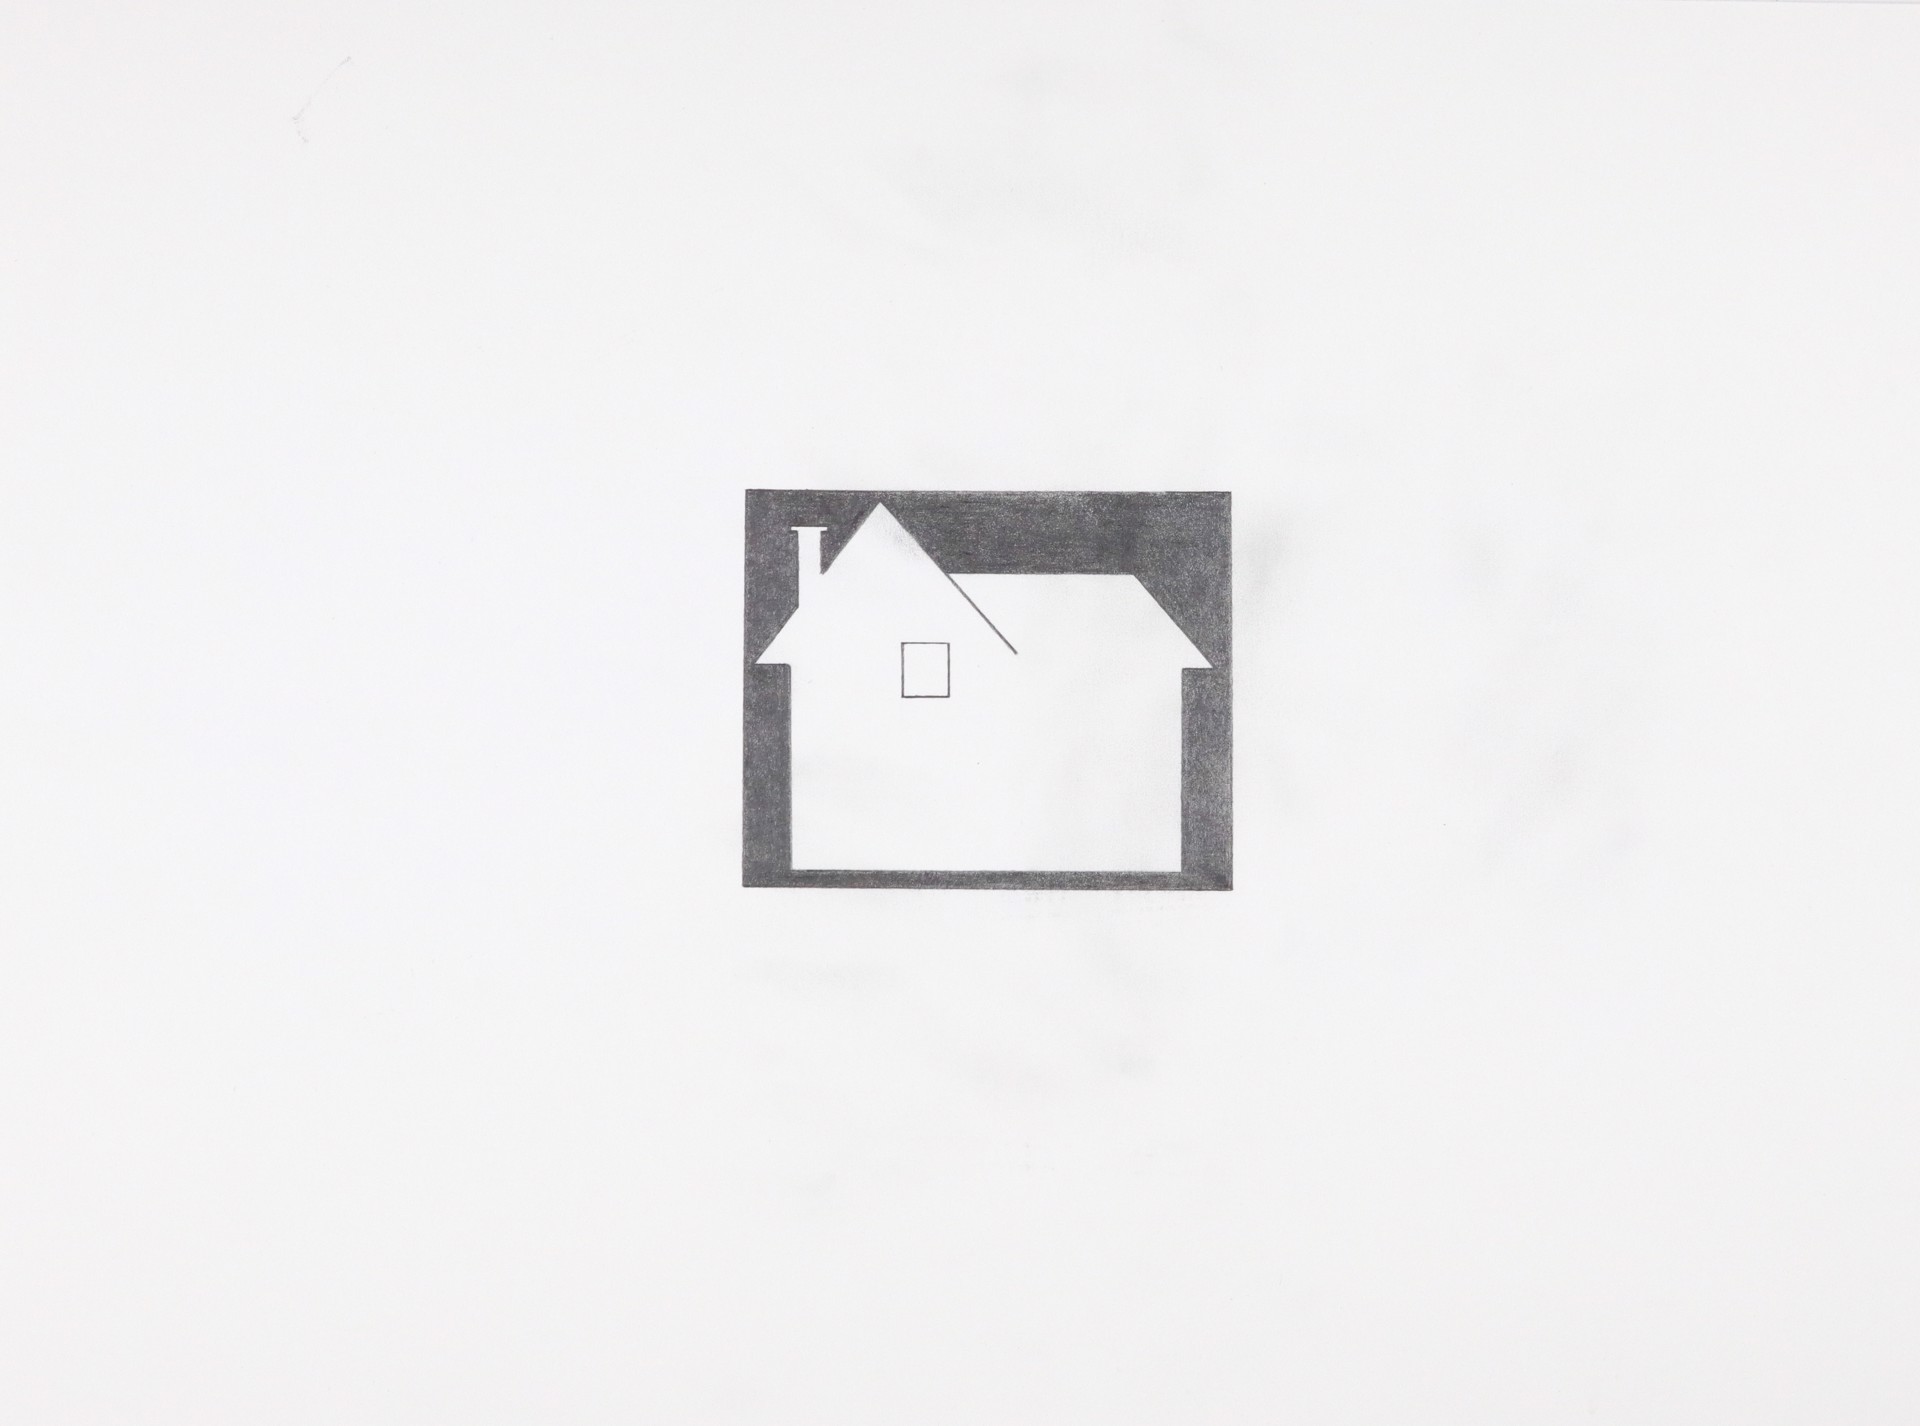 Untitled (House 4) by Keith Lewis